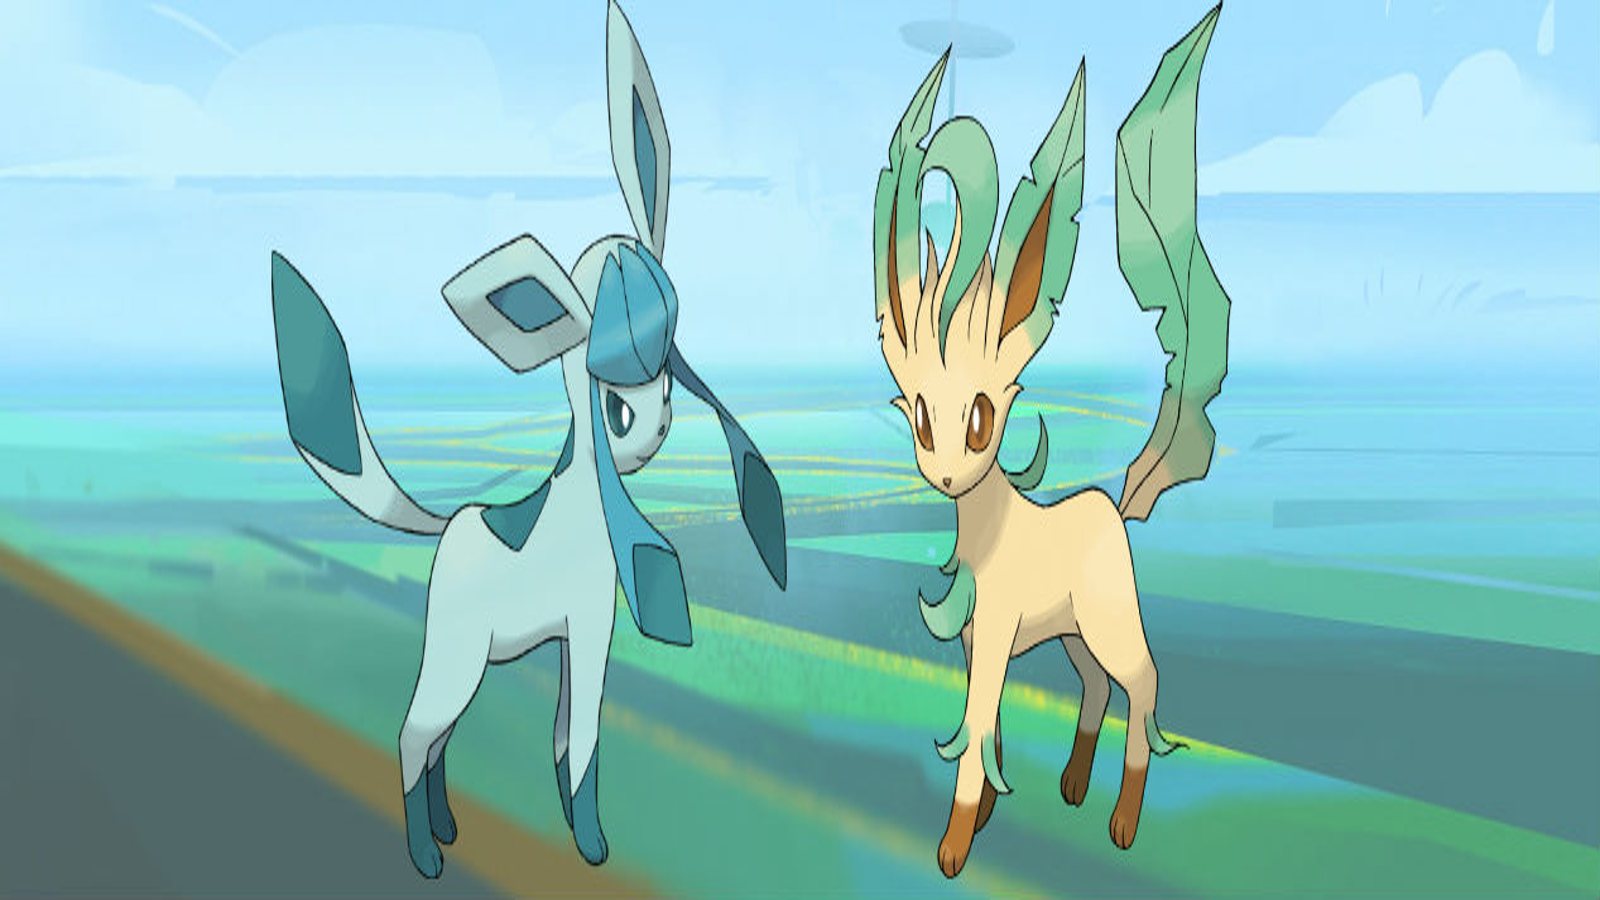 Leafeon and Glaceon are now available on Pokémon Go using these names :  r/gaming